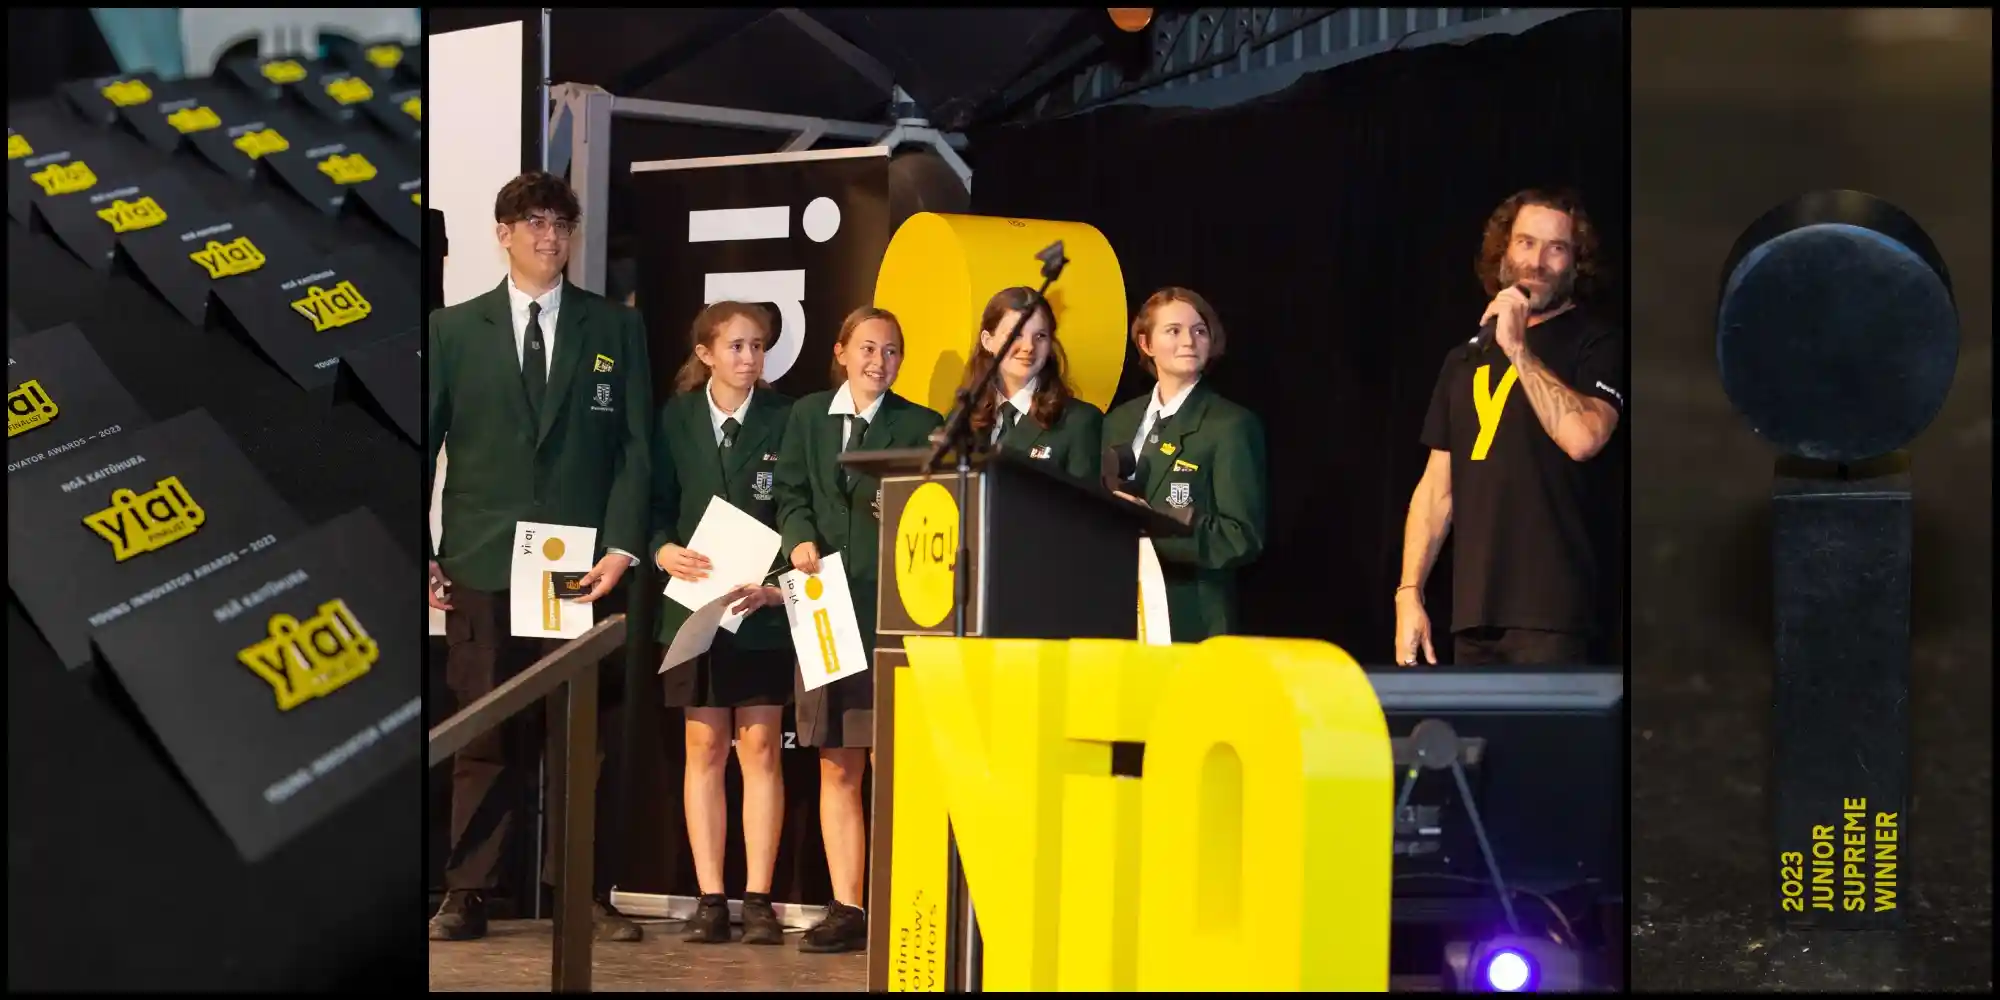 In 2023, yia! continues its legacy in the Western Bay of Plenty, shaping students into visionary leaders. Bridging theory and practice, this initiative has engaged thousands and solidified ties with regional innovators. yia! remains a beacon of innovation.